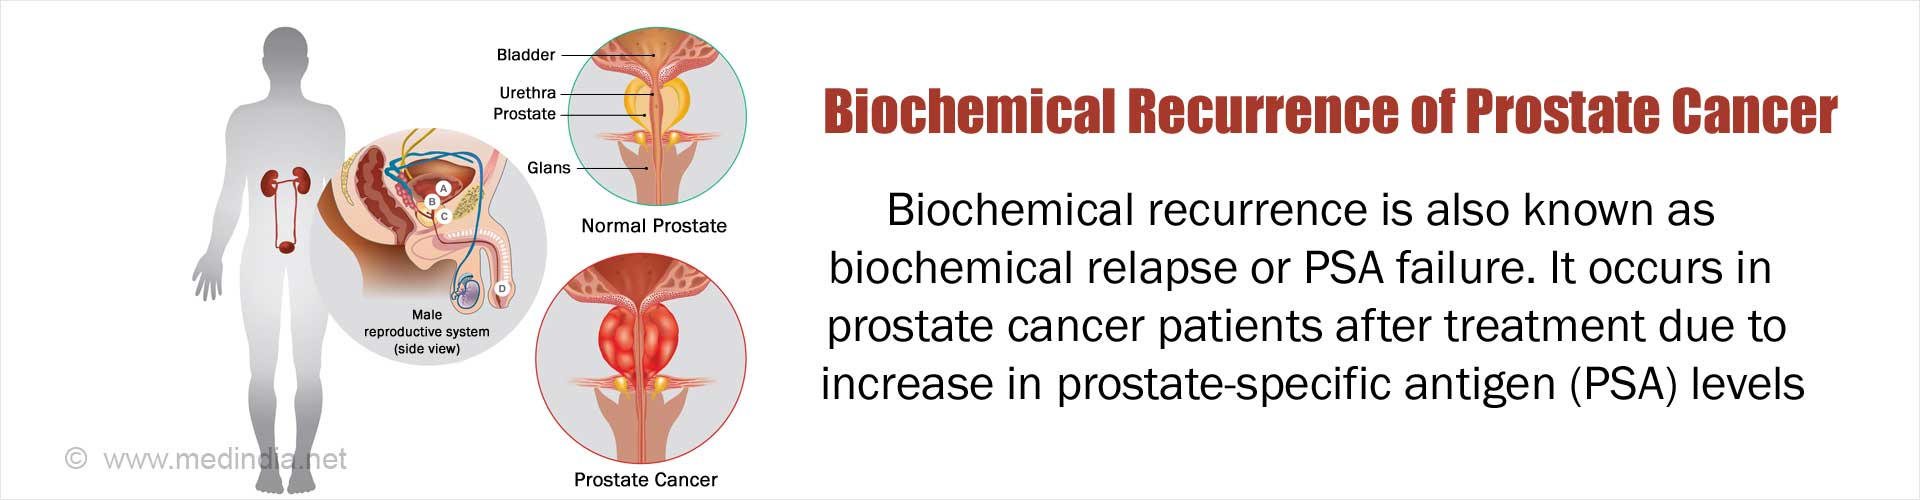 Biochemical Recurrence Of Prostate Cancer References